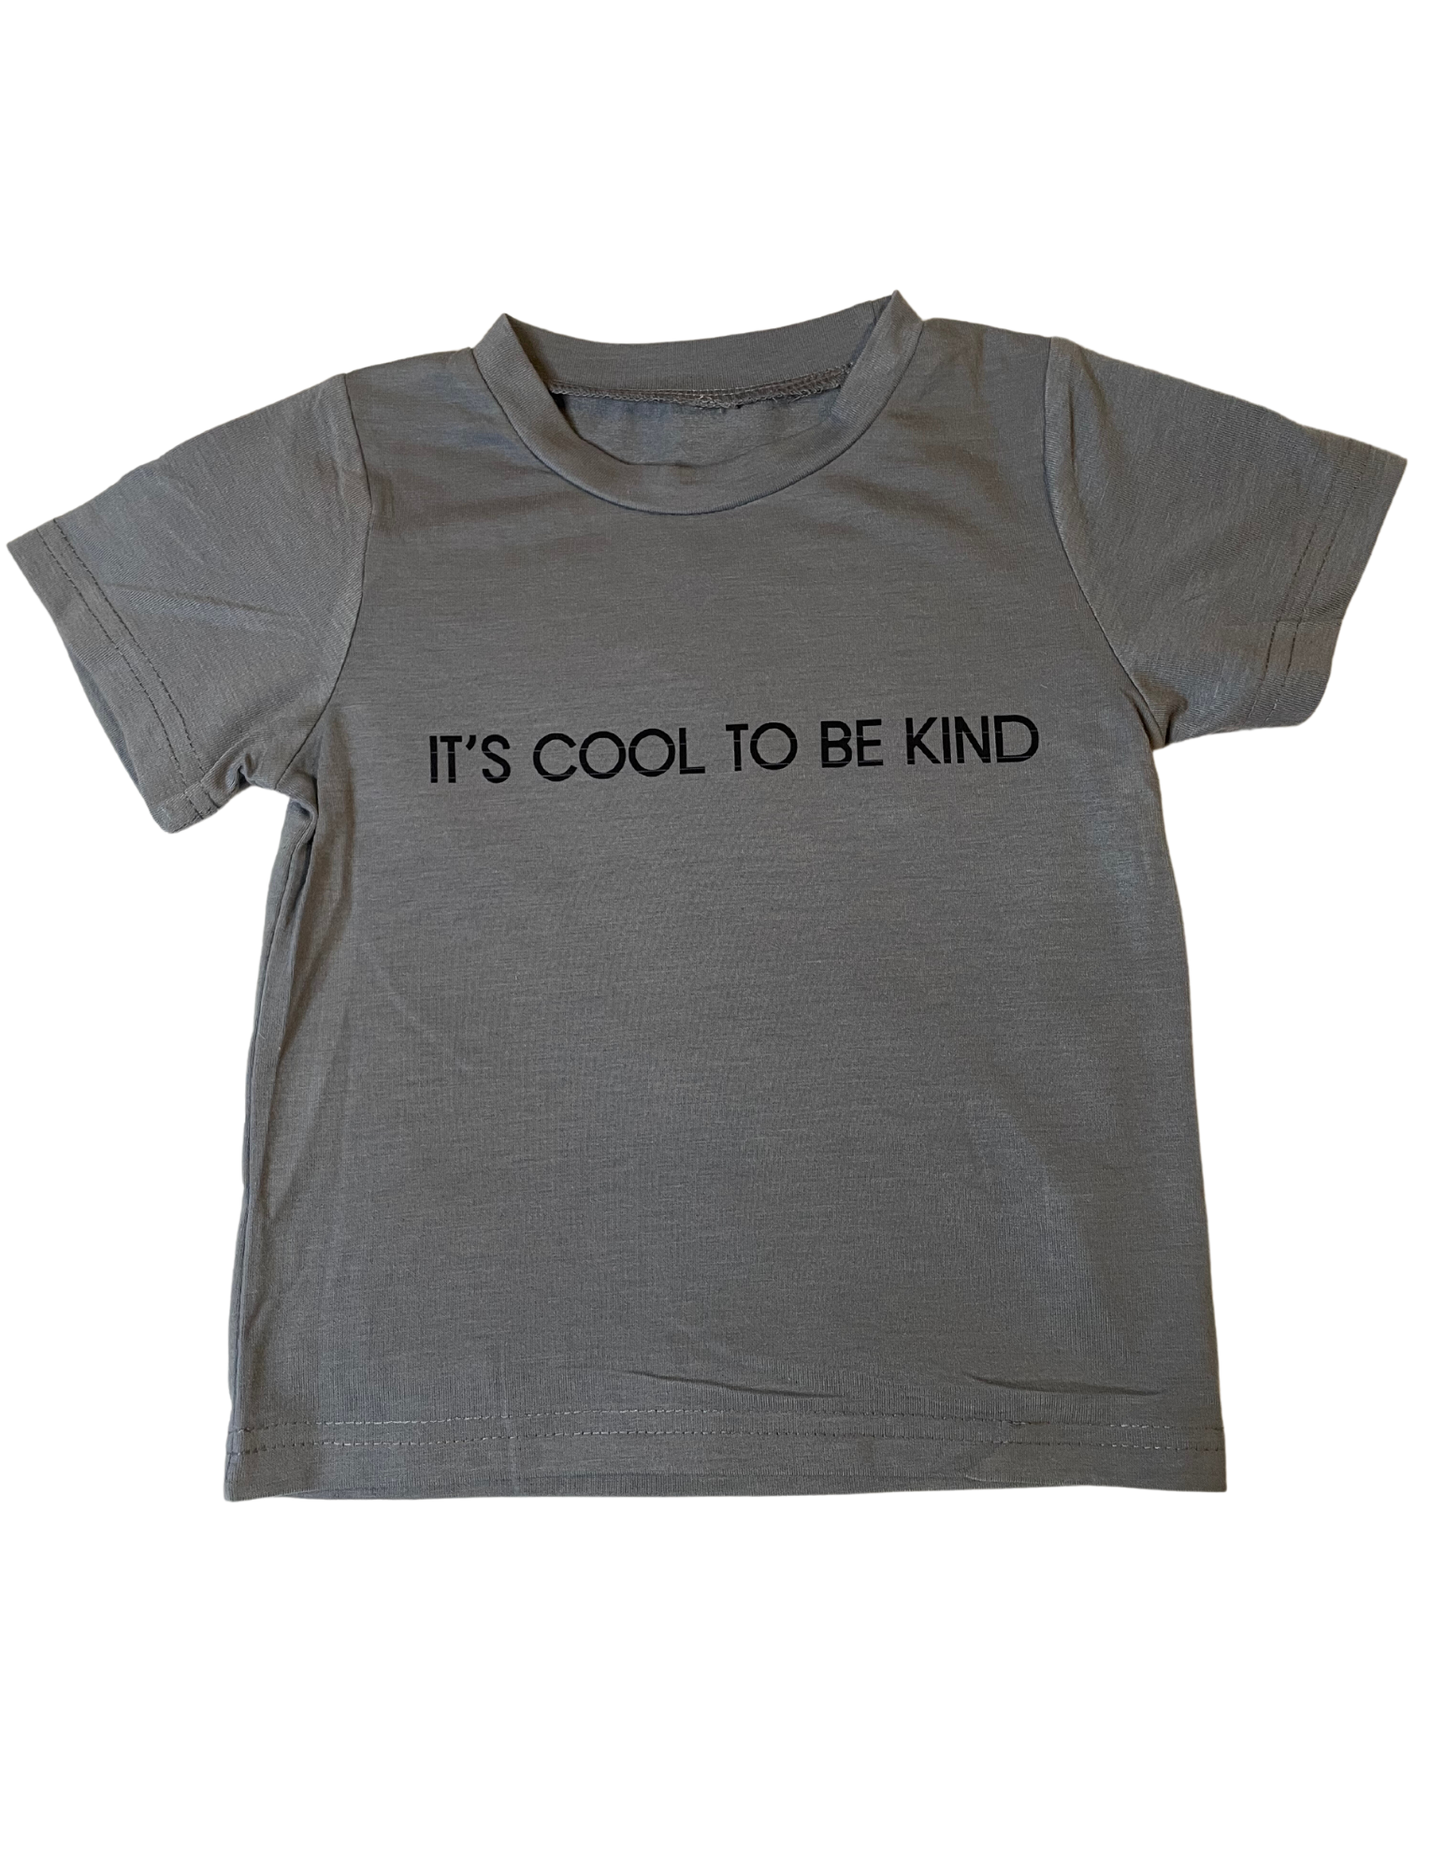 Little Boy's Shirt- It's cool to be kind